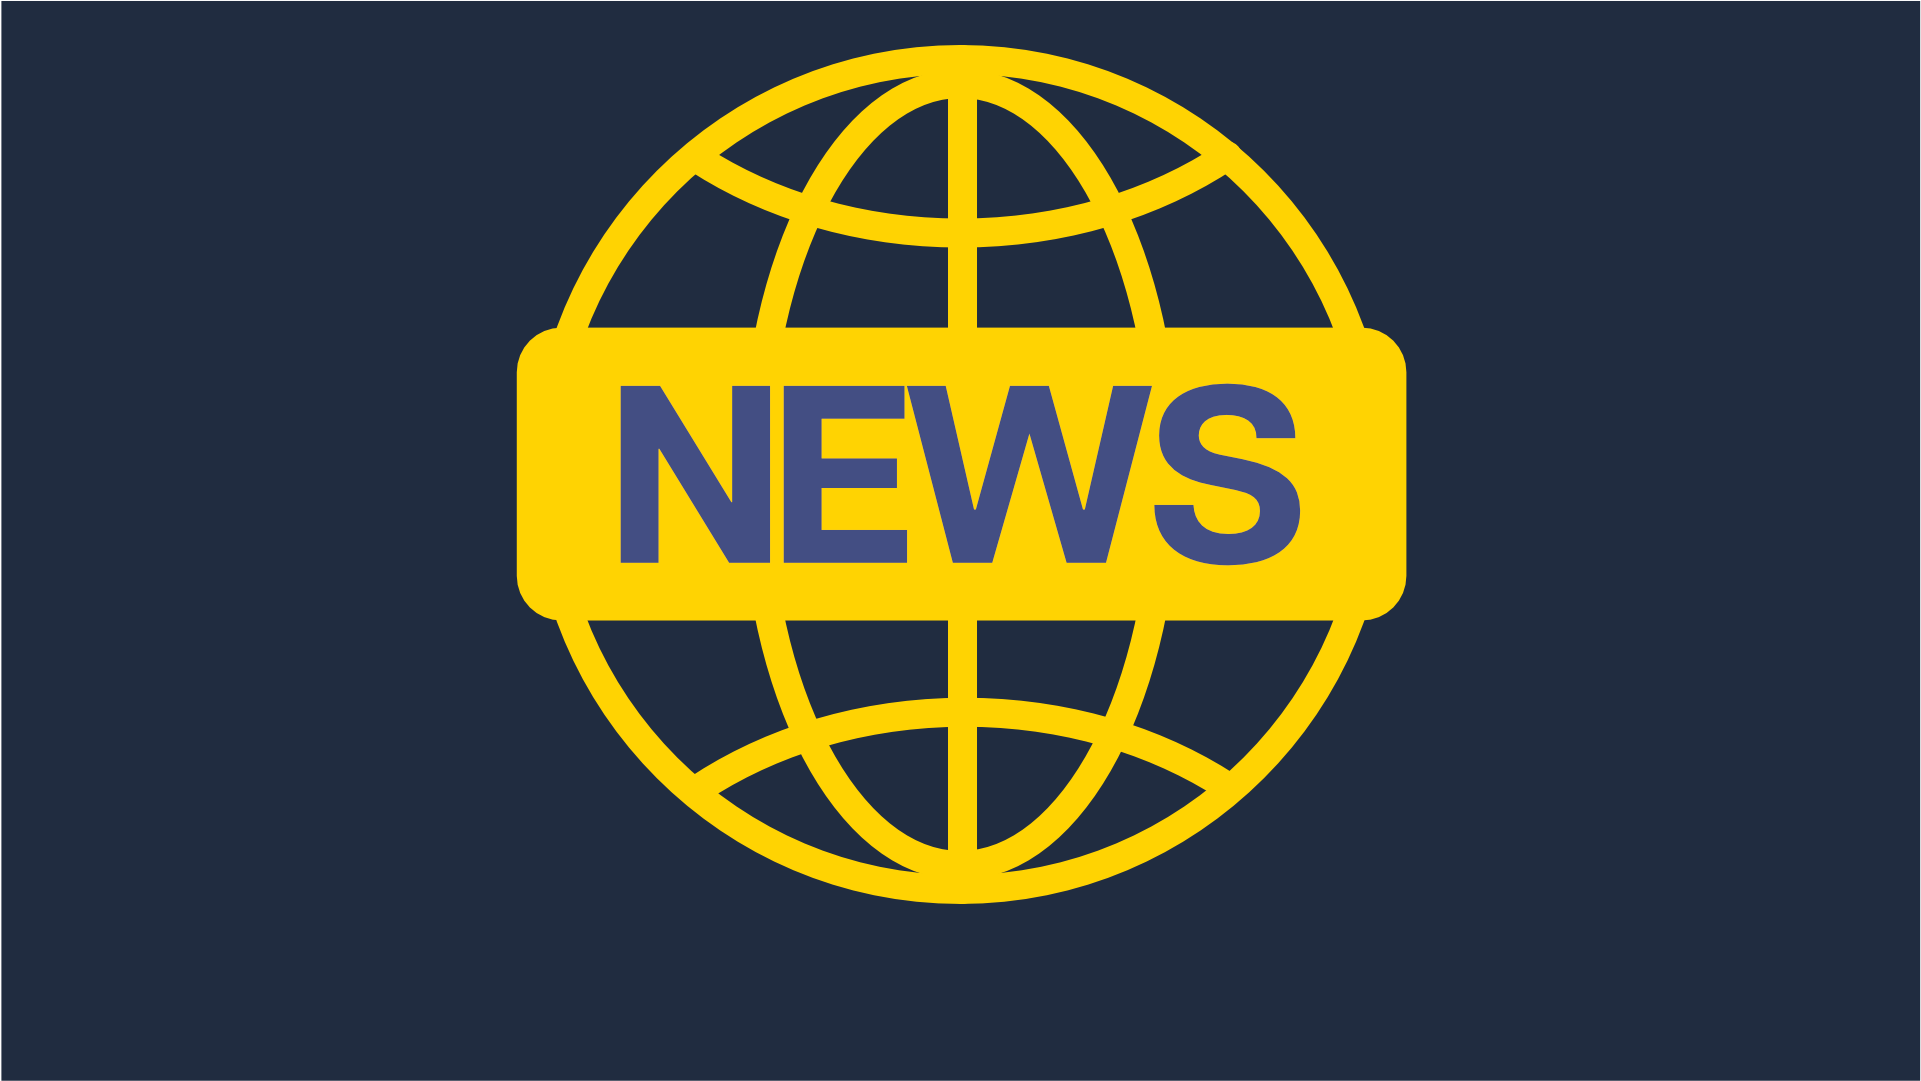 A yellow illustration of a globe against a navy background with the text 'News'